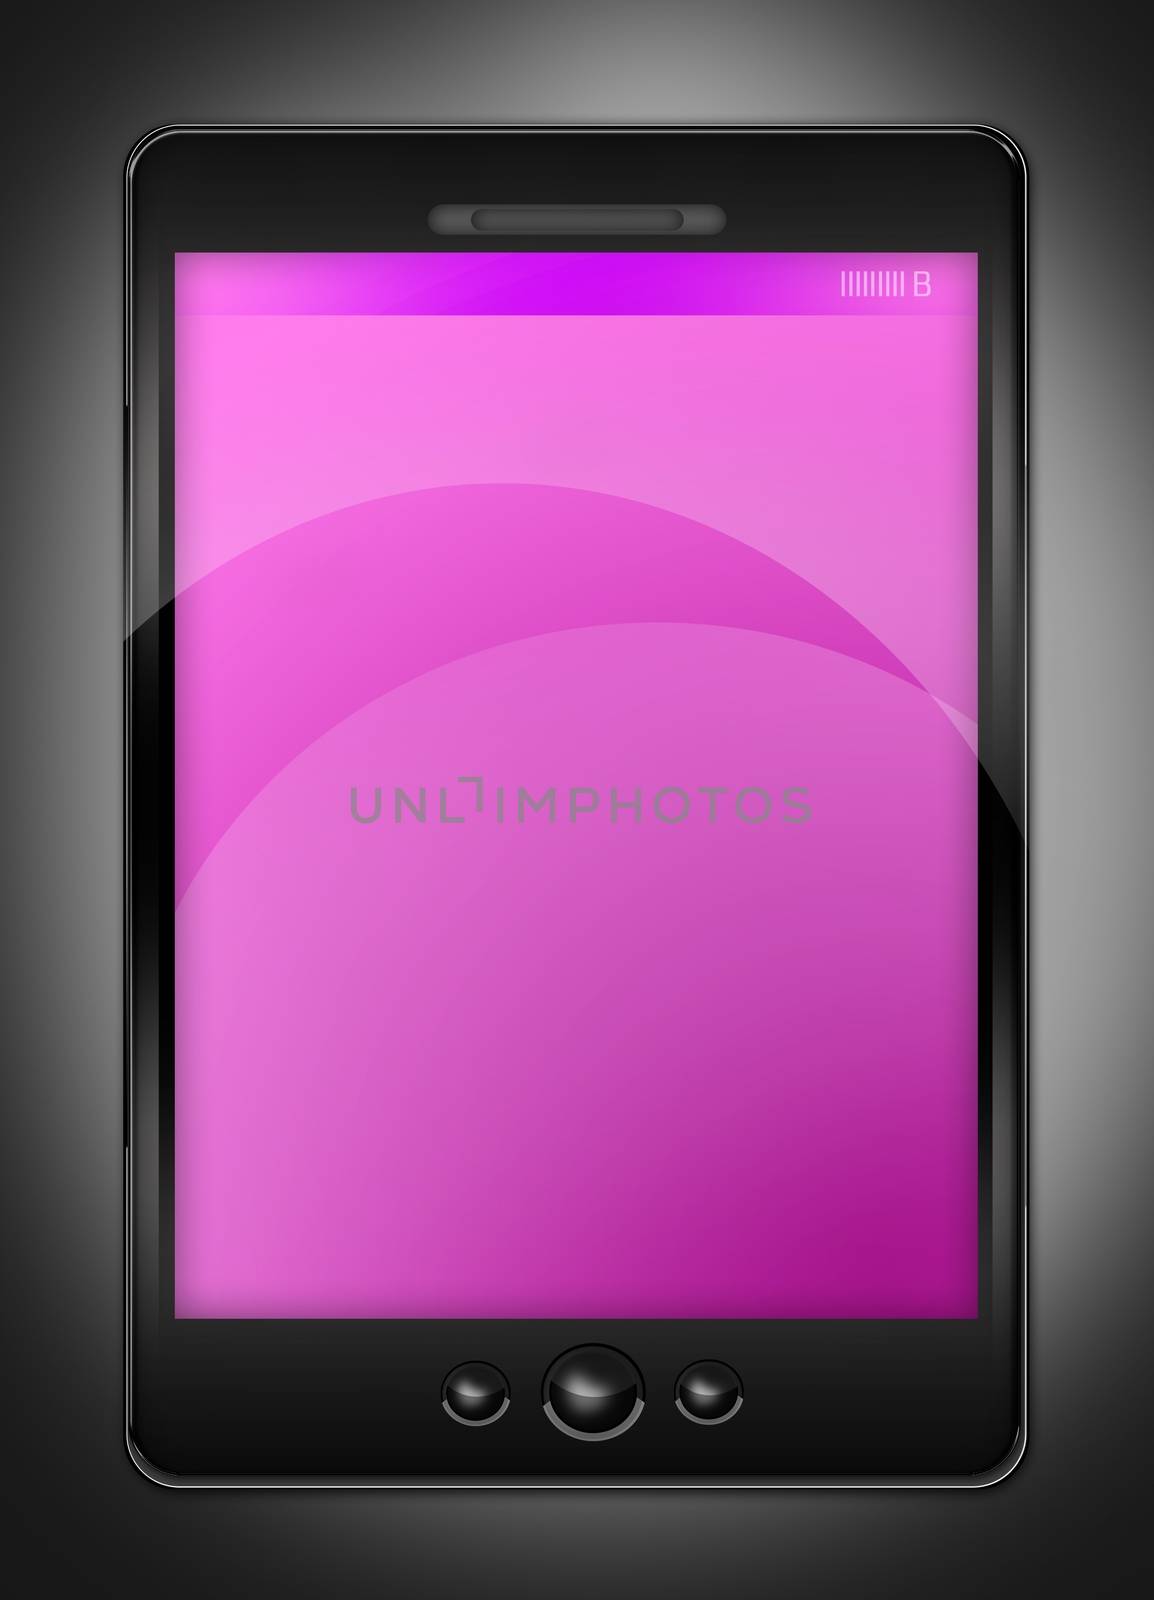 Pink PDA Phone. PDA / Smart Phone illustration. Pink Empty Display - Gray Background. Vertical Graphic.